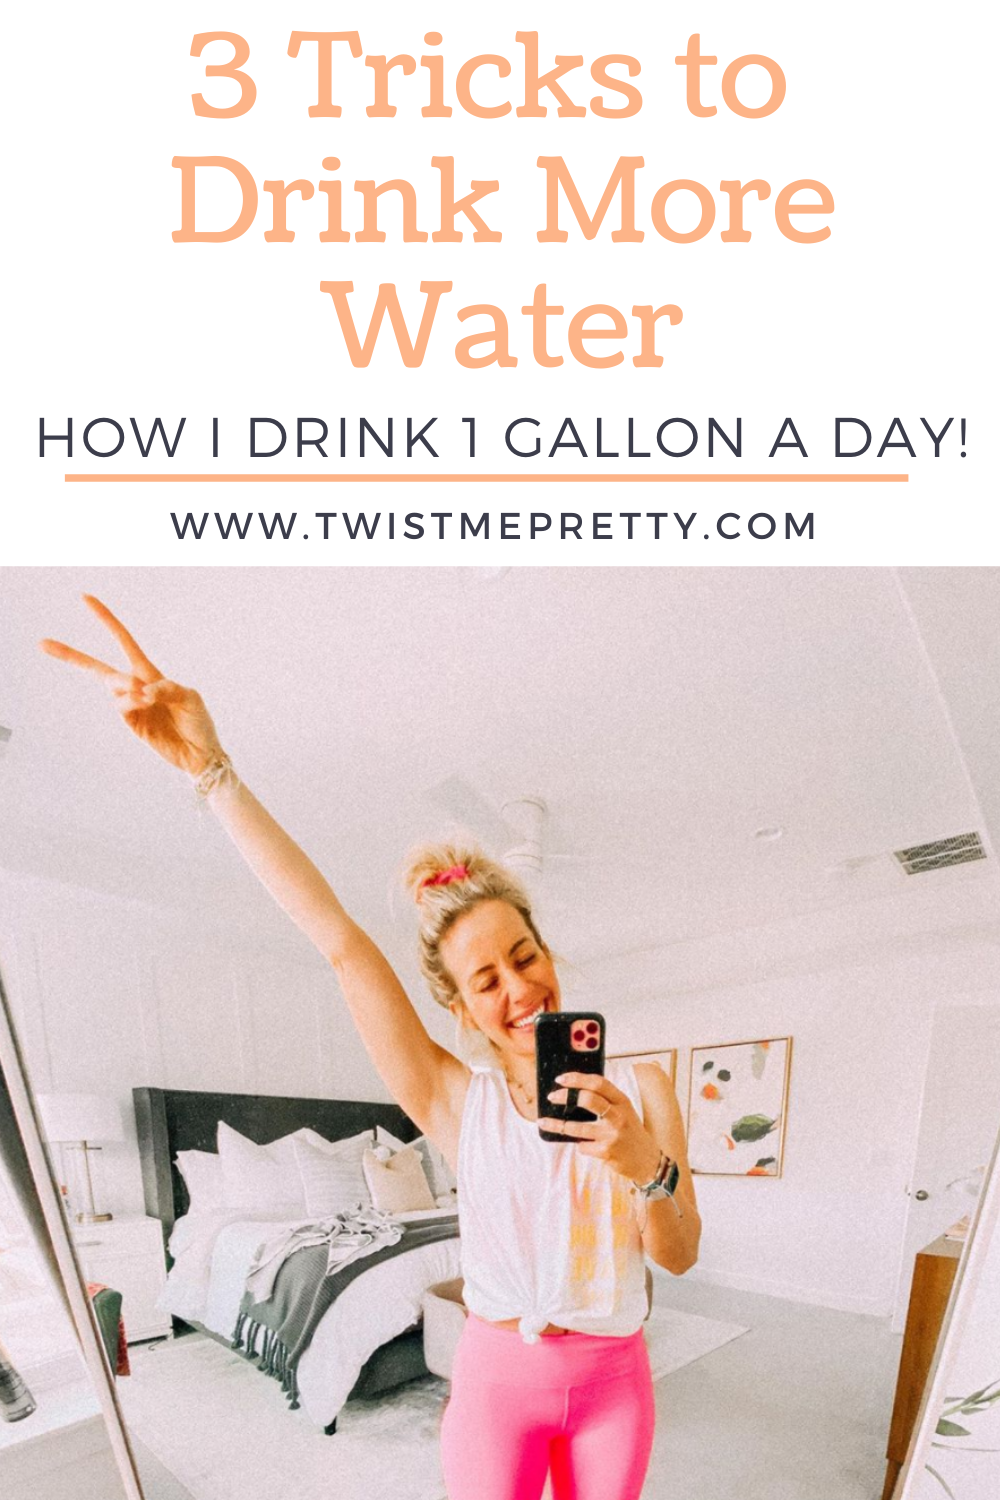 3 tricks to drink more water. How I drink 1 gallon a day! www.twistmepretty.com